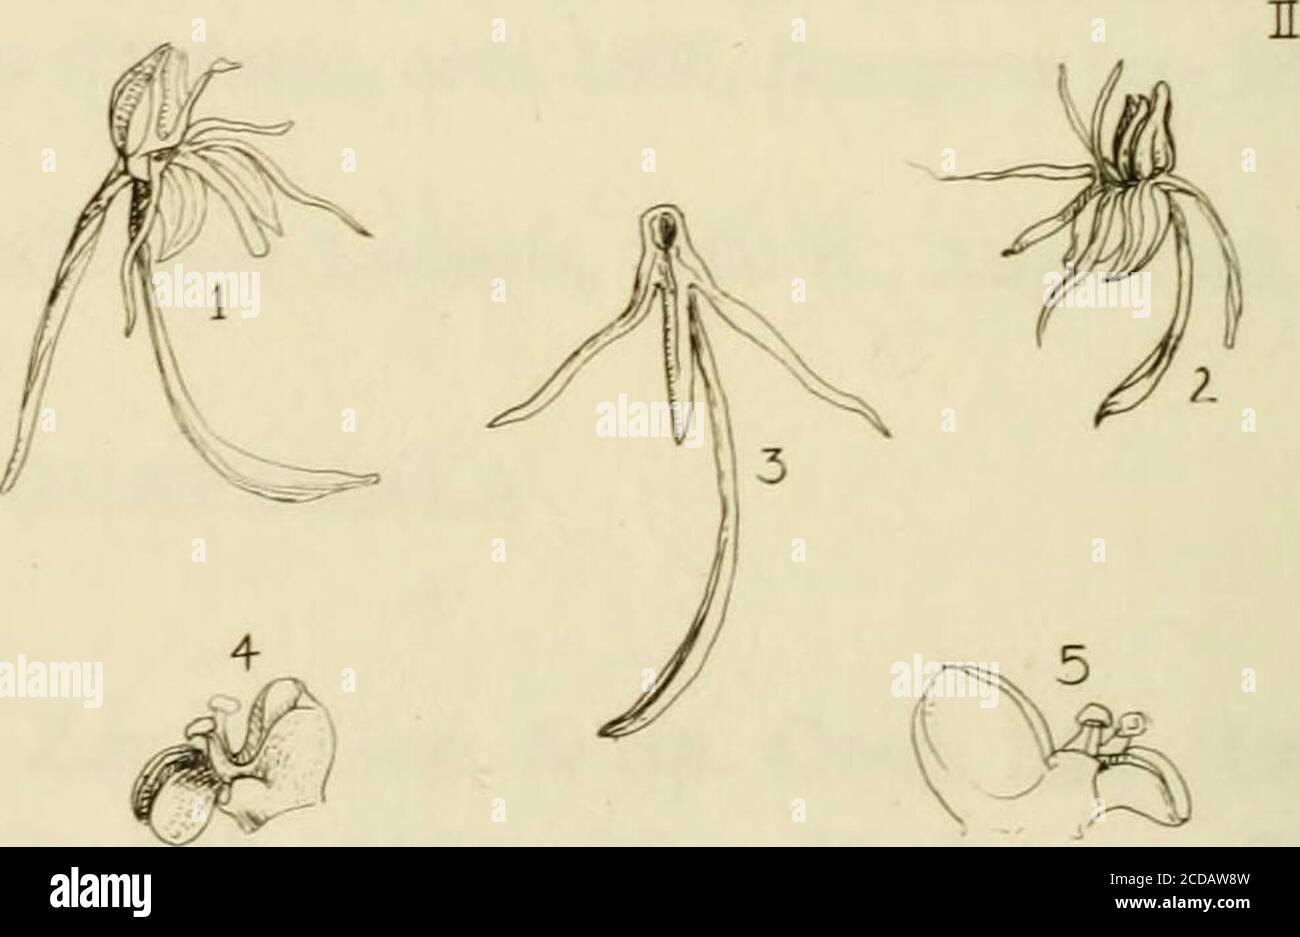 . Orchidaceae: illustrations and studies of the family Orchidaceae . HABENARIA on? a v 6 ens IS (JA.ich & (Jat-. HABENARIA ^i/fusa cA-icA- ^ (JaC ORCHIDACE^ Plate 75 I. Habenaria orizabensis. Flowers, etched froma photograph of the drawing by A. Richard. II. Habenaria diffusa. 1 and 2. Flower. 3. La-bellum and spur. 4 and 5. Column. Etched froma photograph of the drawing by A. Richard. [ 249 ] ORCHIDACE^ H.flexuosa Bot. Jahrb. 16: 124 (1893), Orch. Gen. et Sp. 1: 297 (1898).Not H. lactiflora. Rich. & Gal. 23. Habenaria flexuosa. H. foliis obiongo-lanceolatis acutis, floribus distantibus,bracte Stock Photo